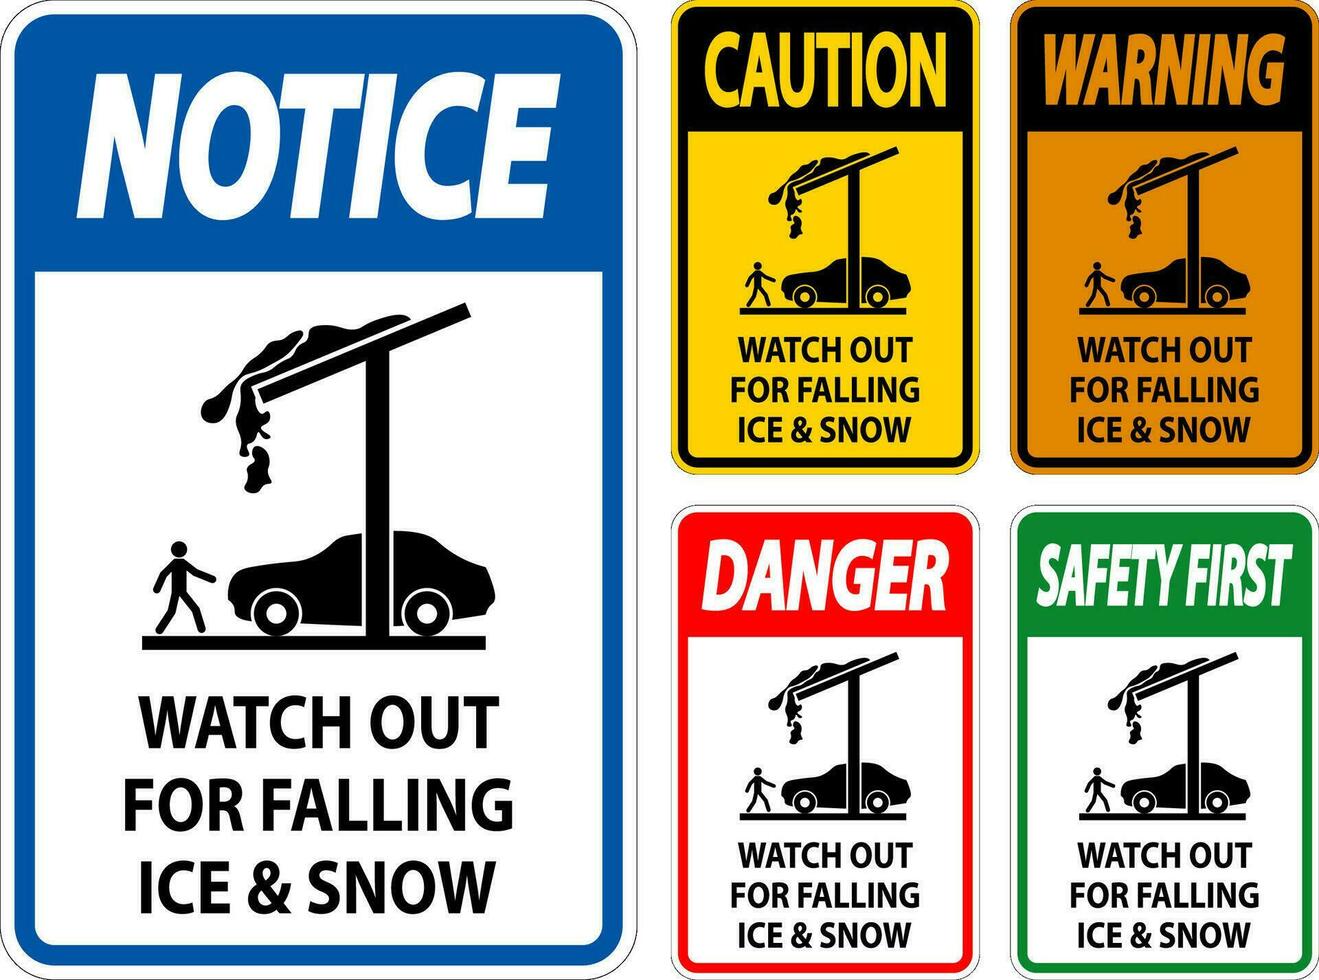 Caution Sign Watch Out For Falling Ice And Snow vector